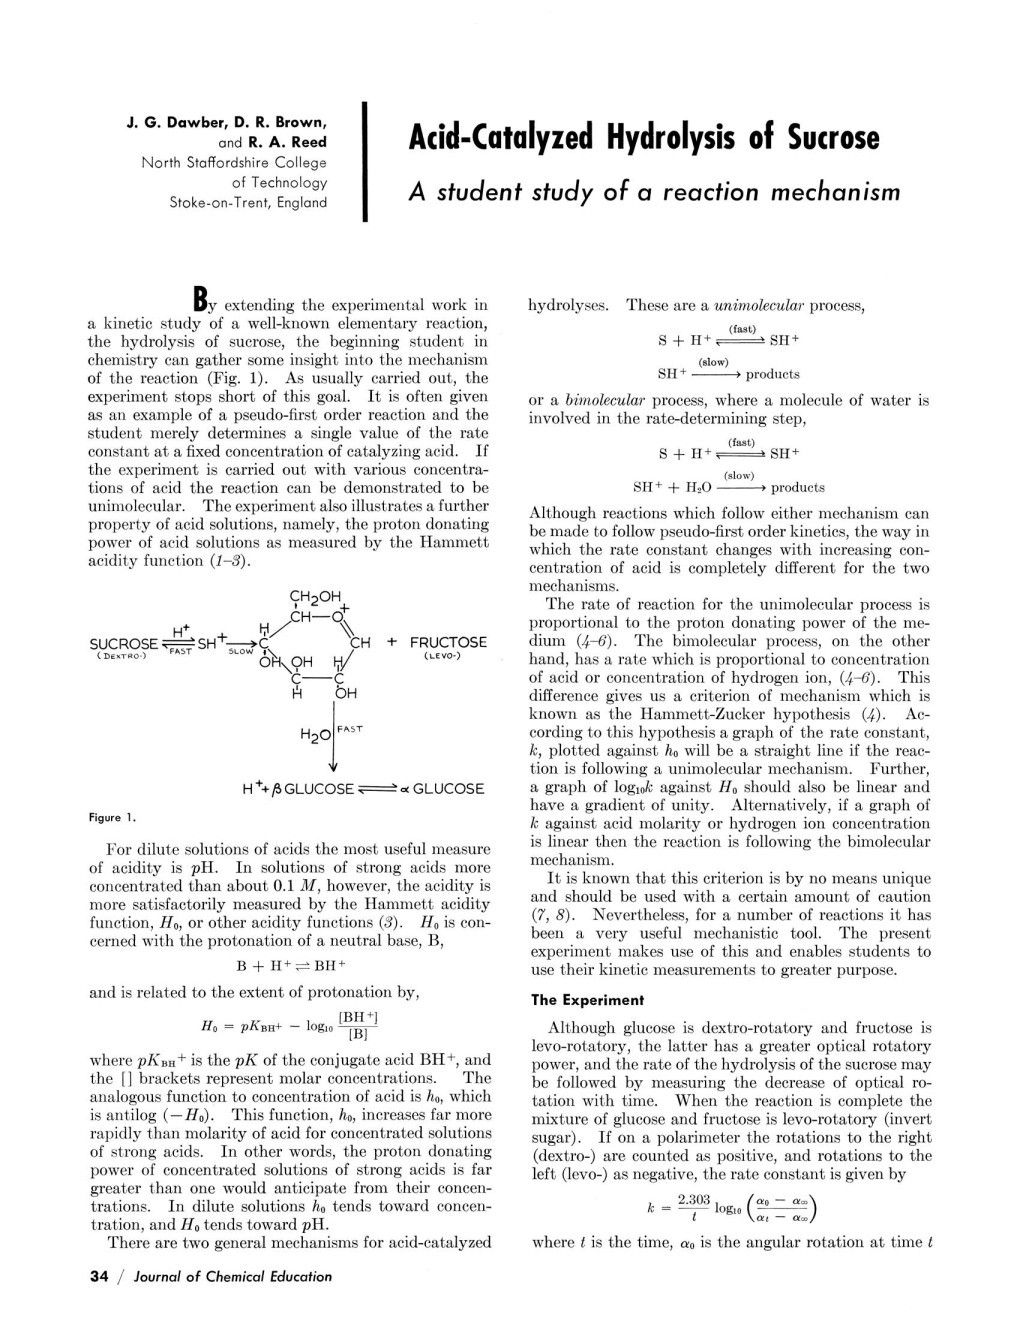 Acid-Catalyzed Hydrolysis of Sucrose: a Student Study of a Reaction